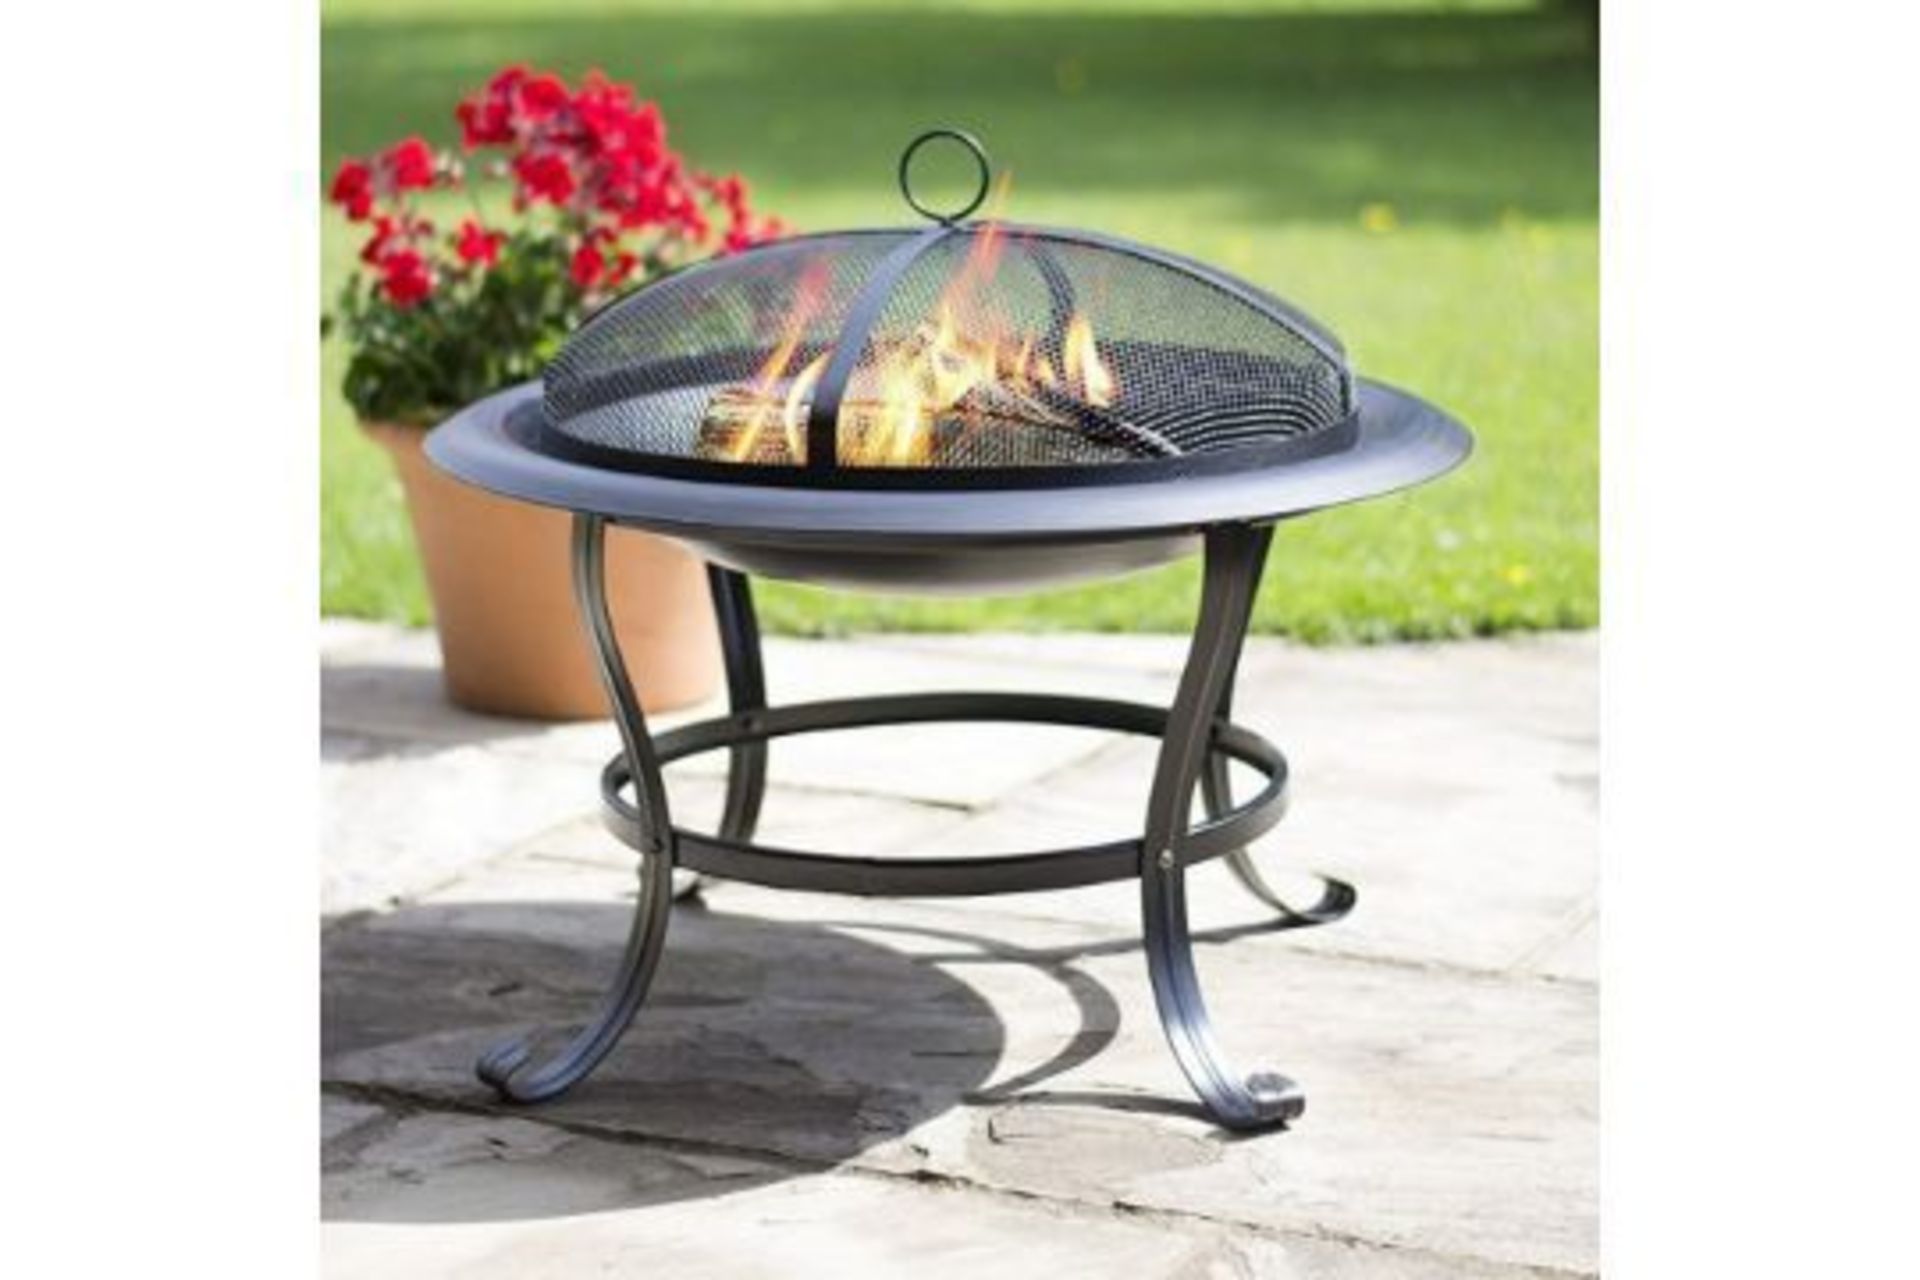 PALLET TO CONTAIN 10 x New Boxed STEEL FIRE PIT BOWL WITH MESH LID & COOKING GRILL. This stylish